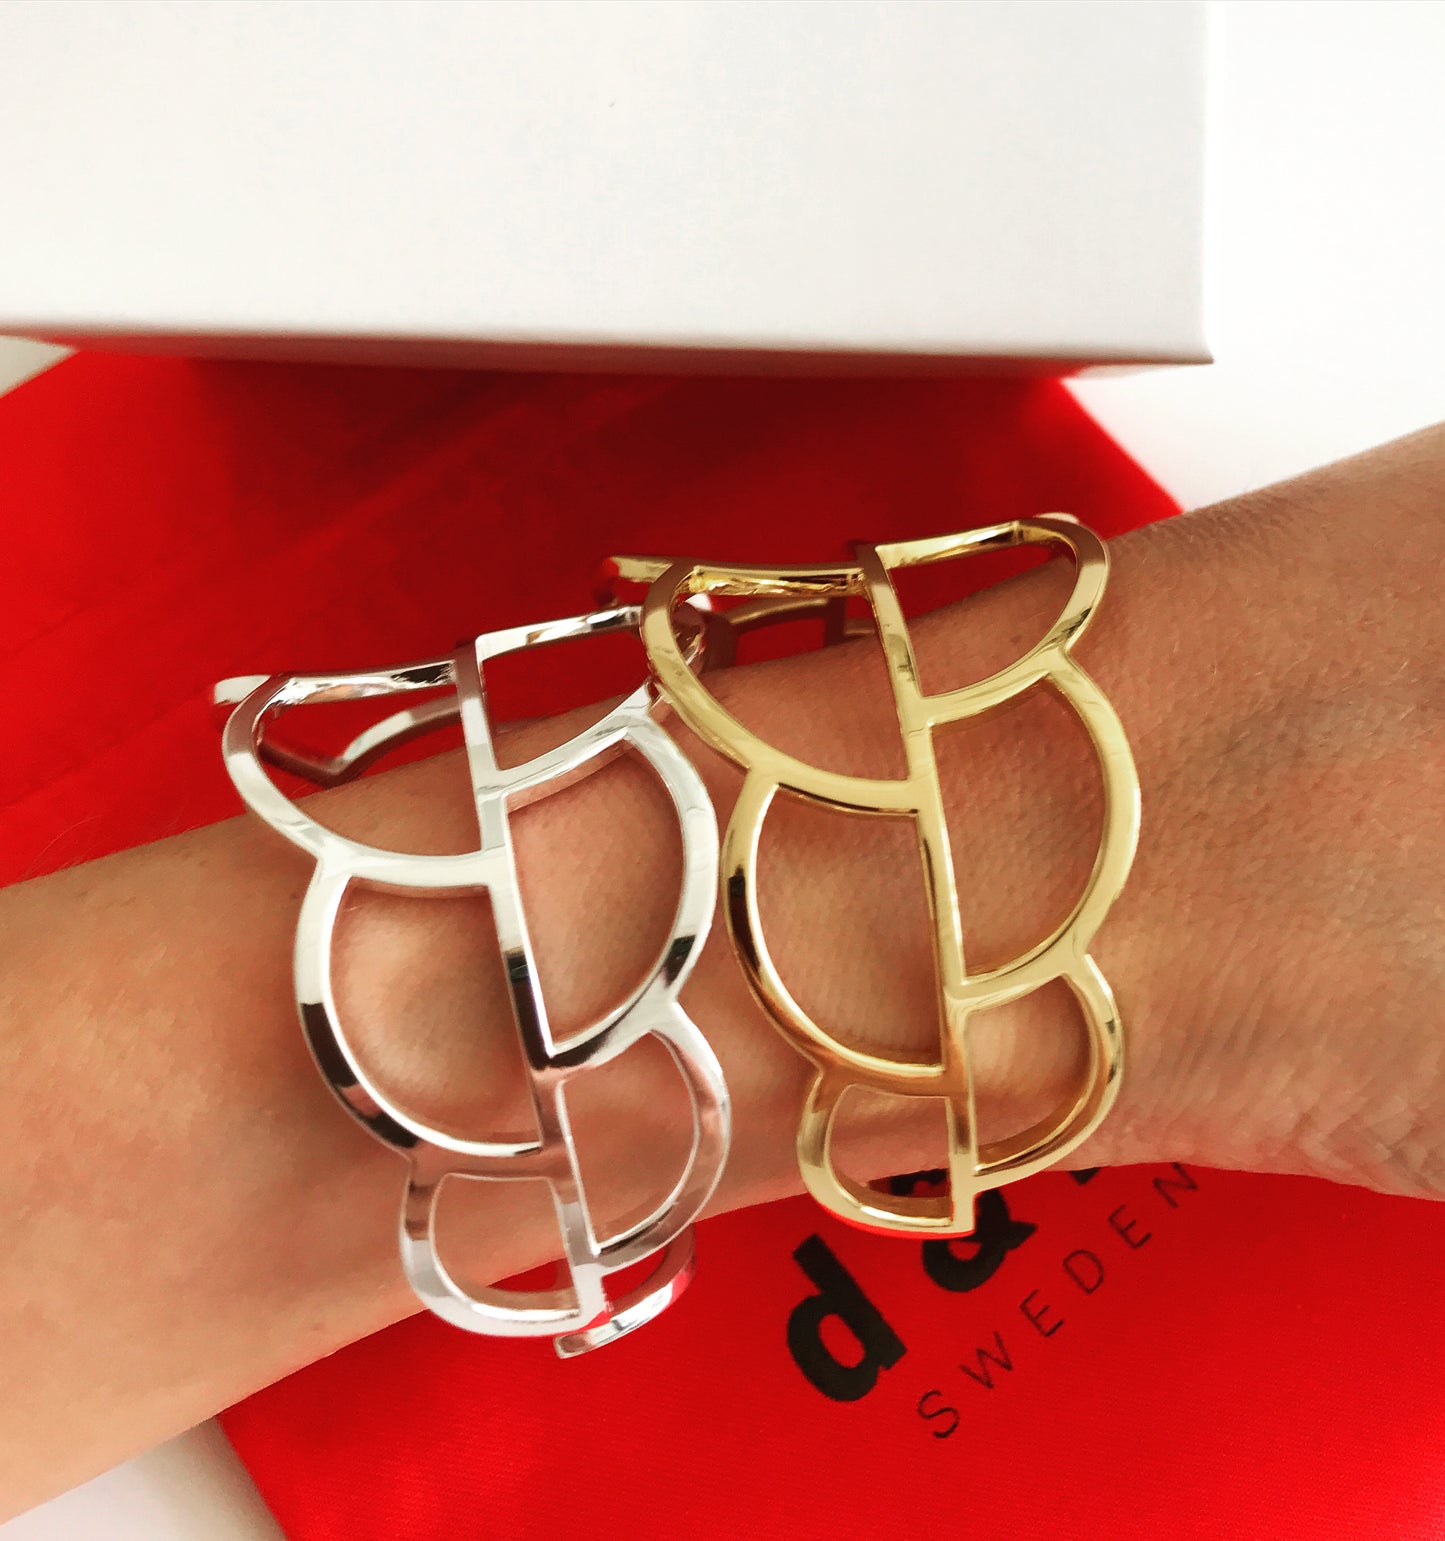 Classy yet edgy cuff bracelet from Drift collection. This design represents deconstructed circles and is inspired by the imperfection of life.  Material: 18 karat gold-plated silver.  Size: adjustable, fits any wrist.